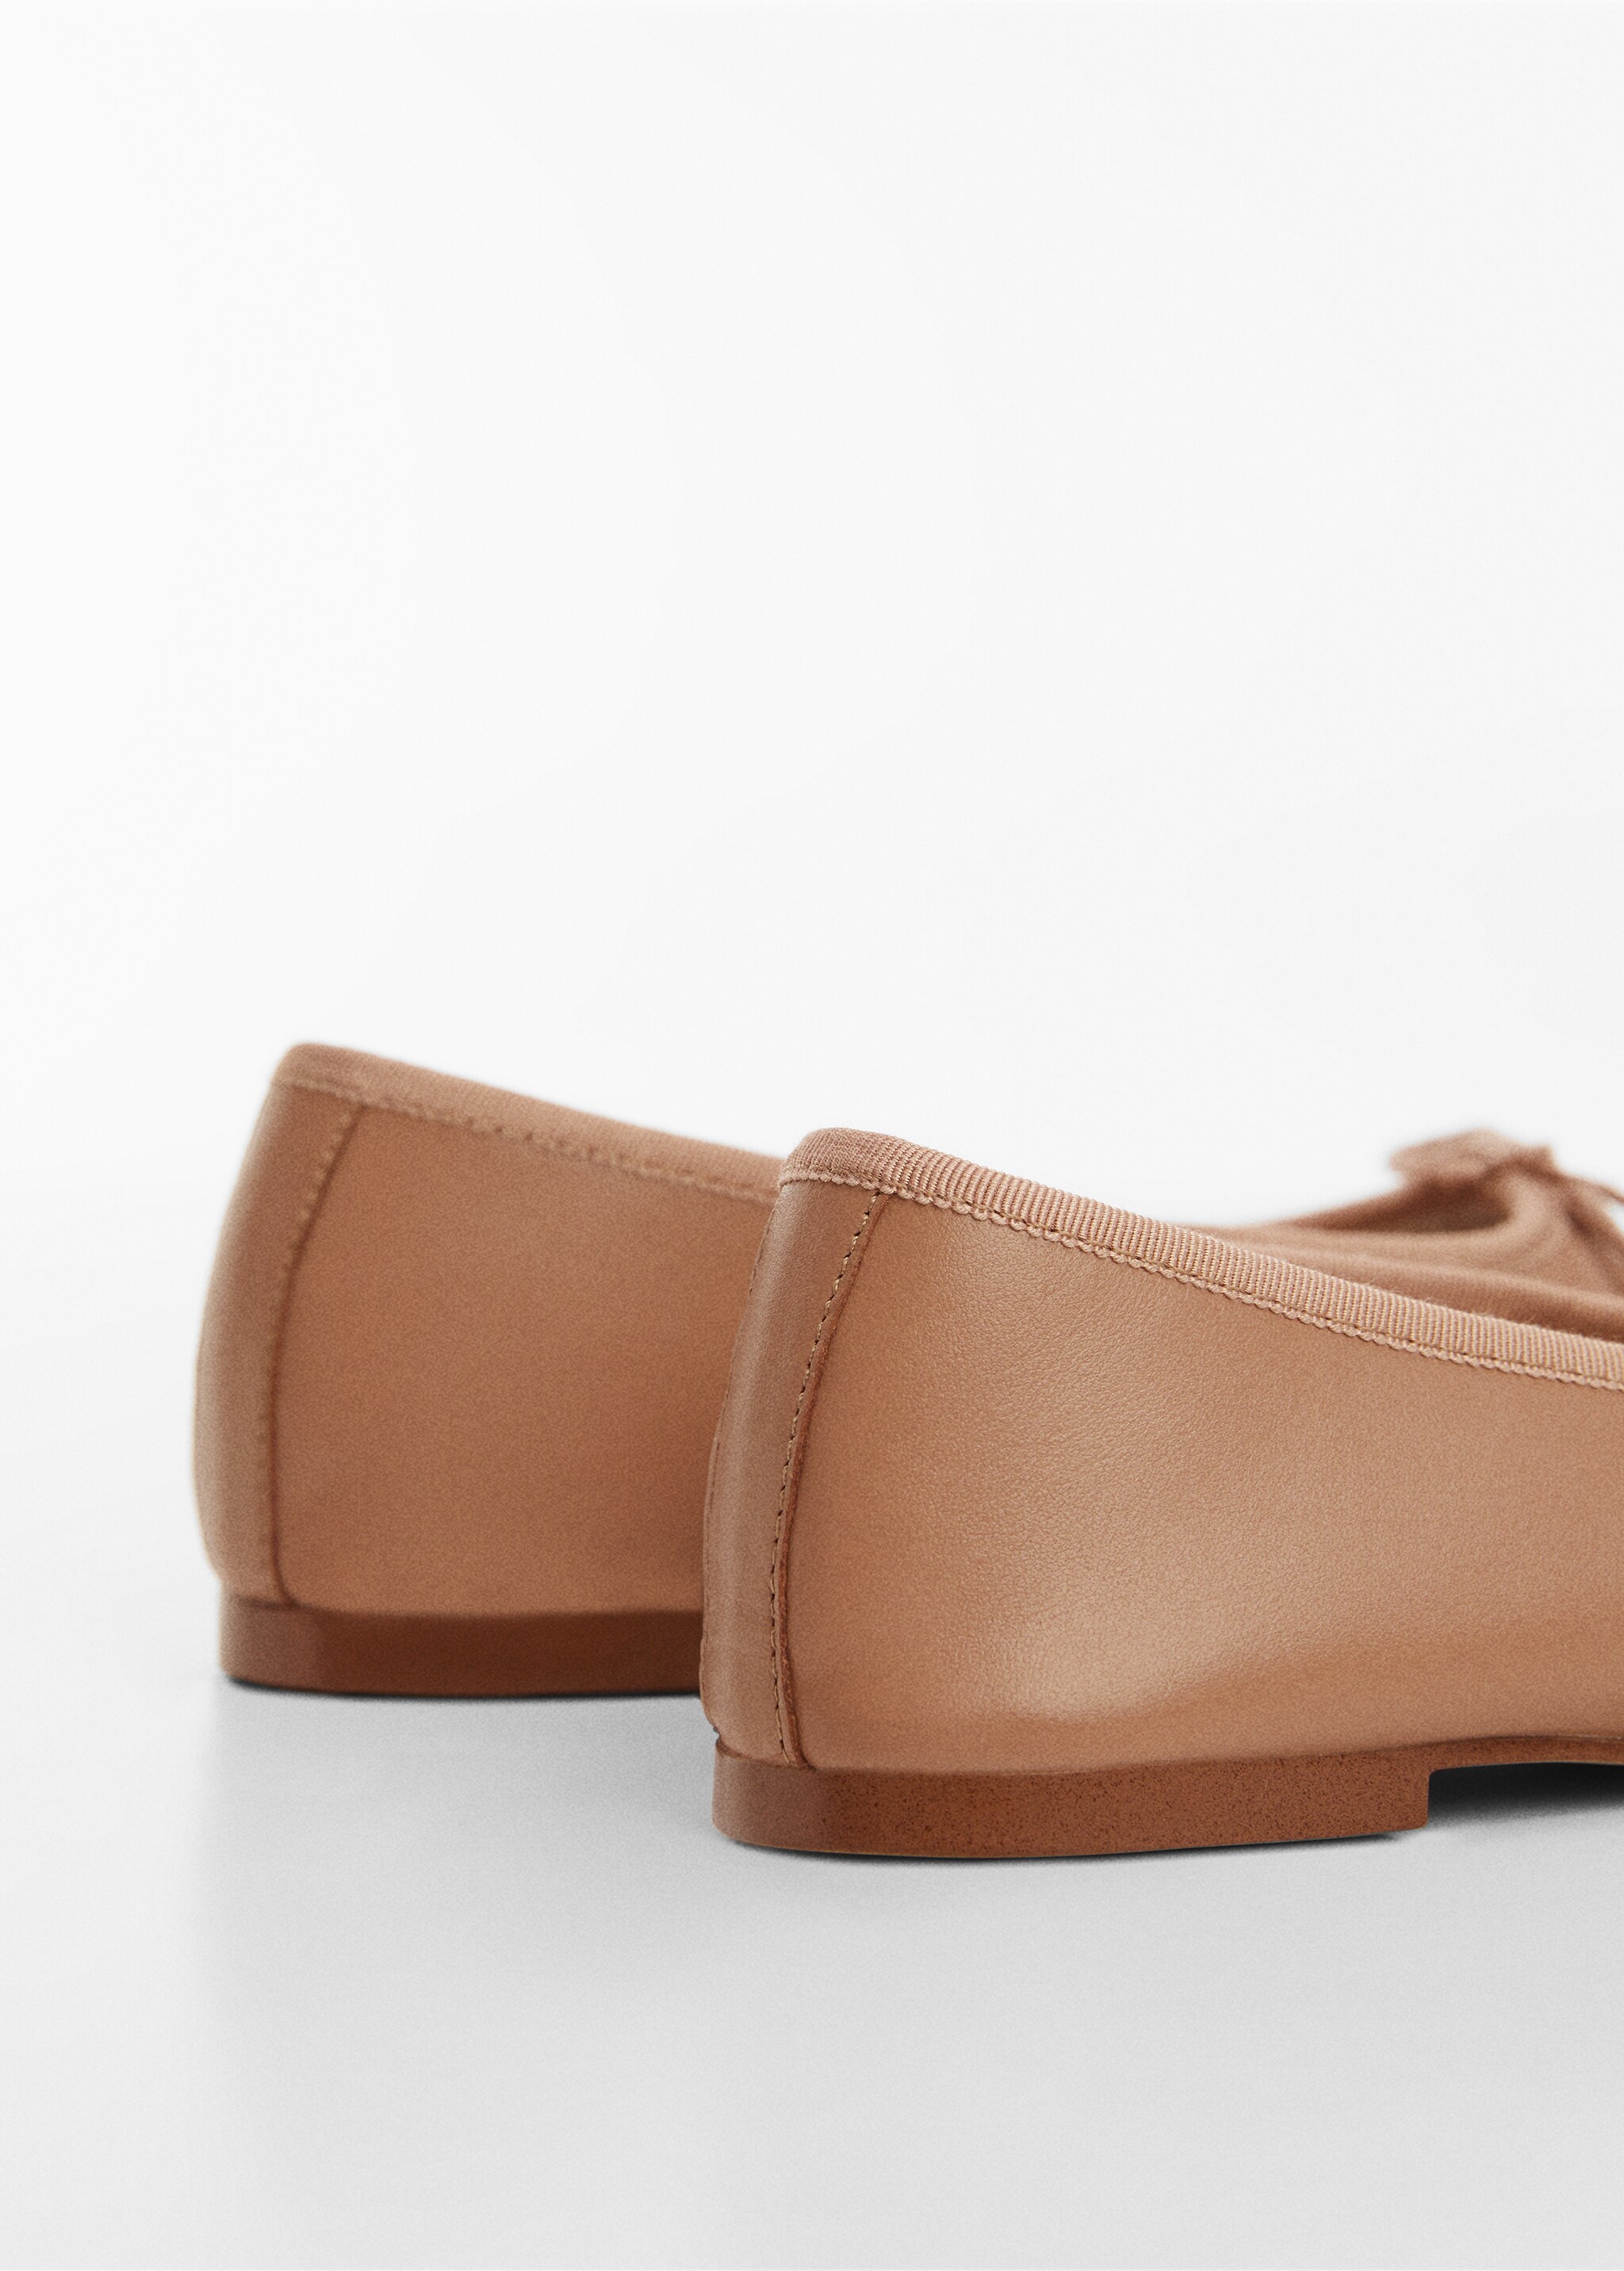 Bow leather ballerina - Details of the article 1